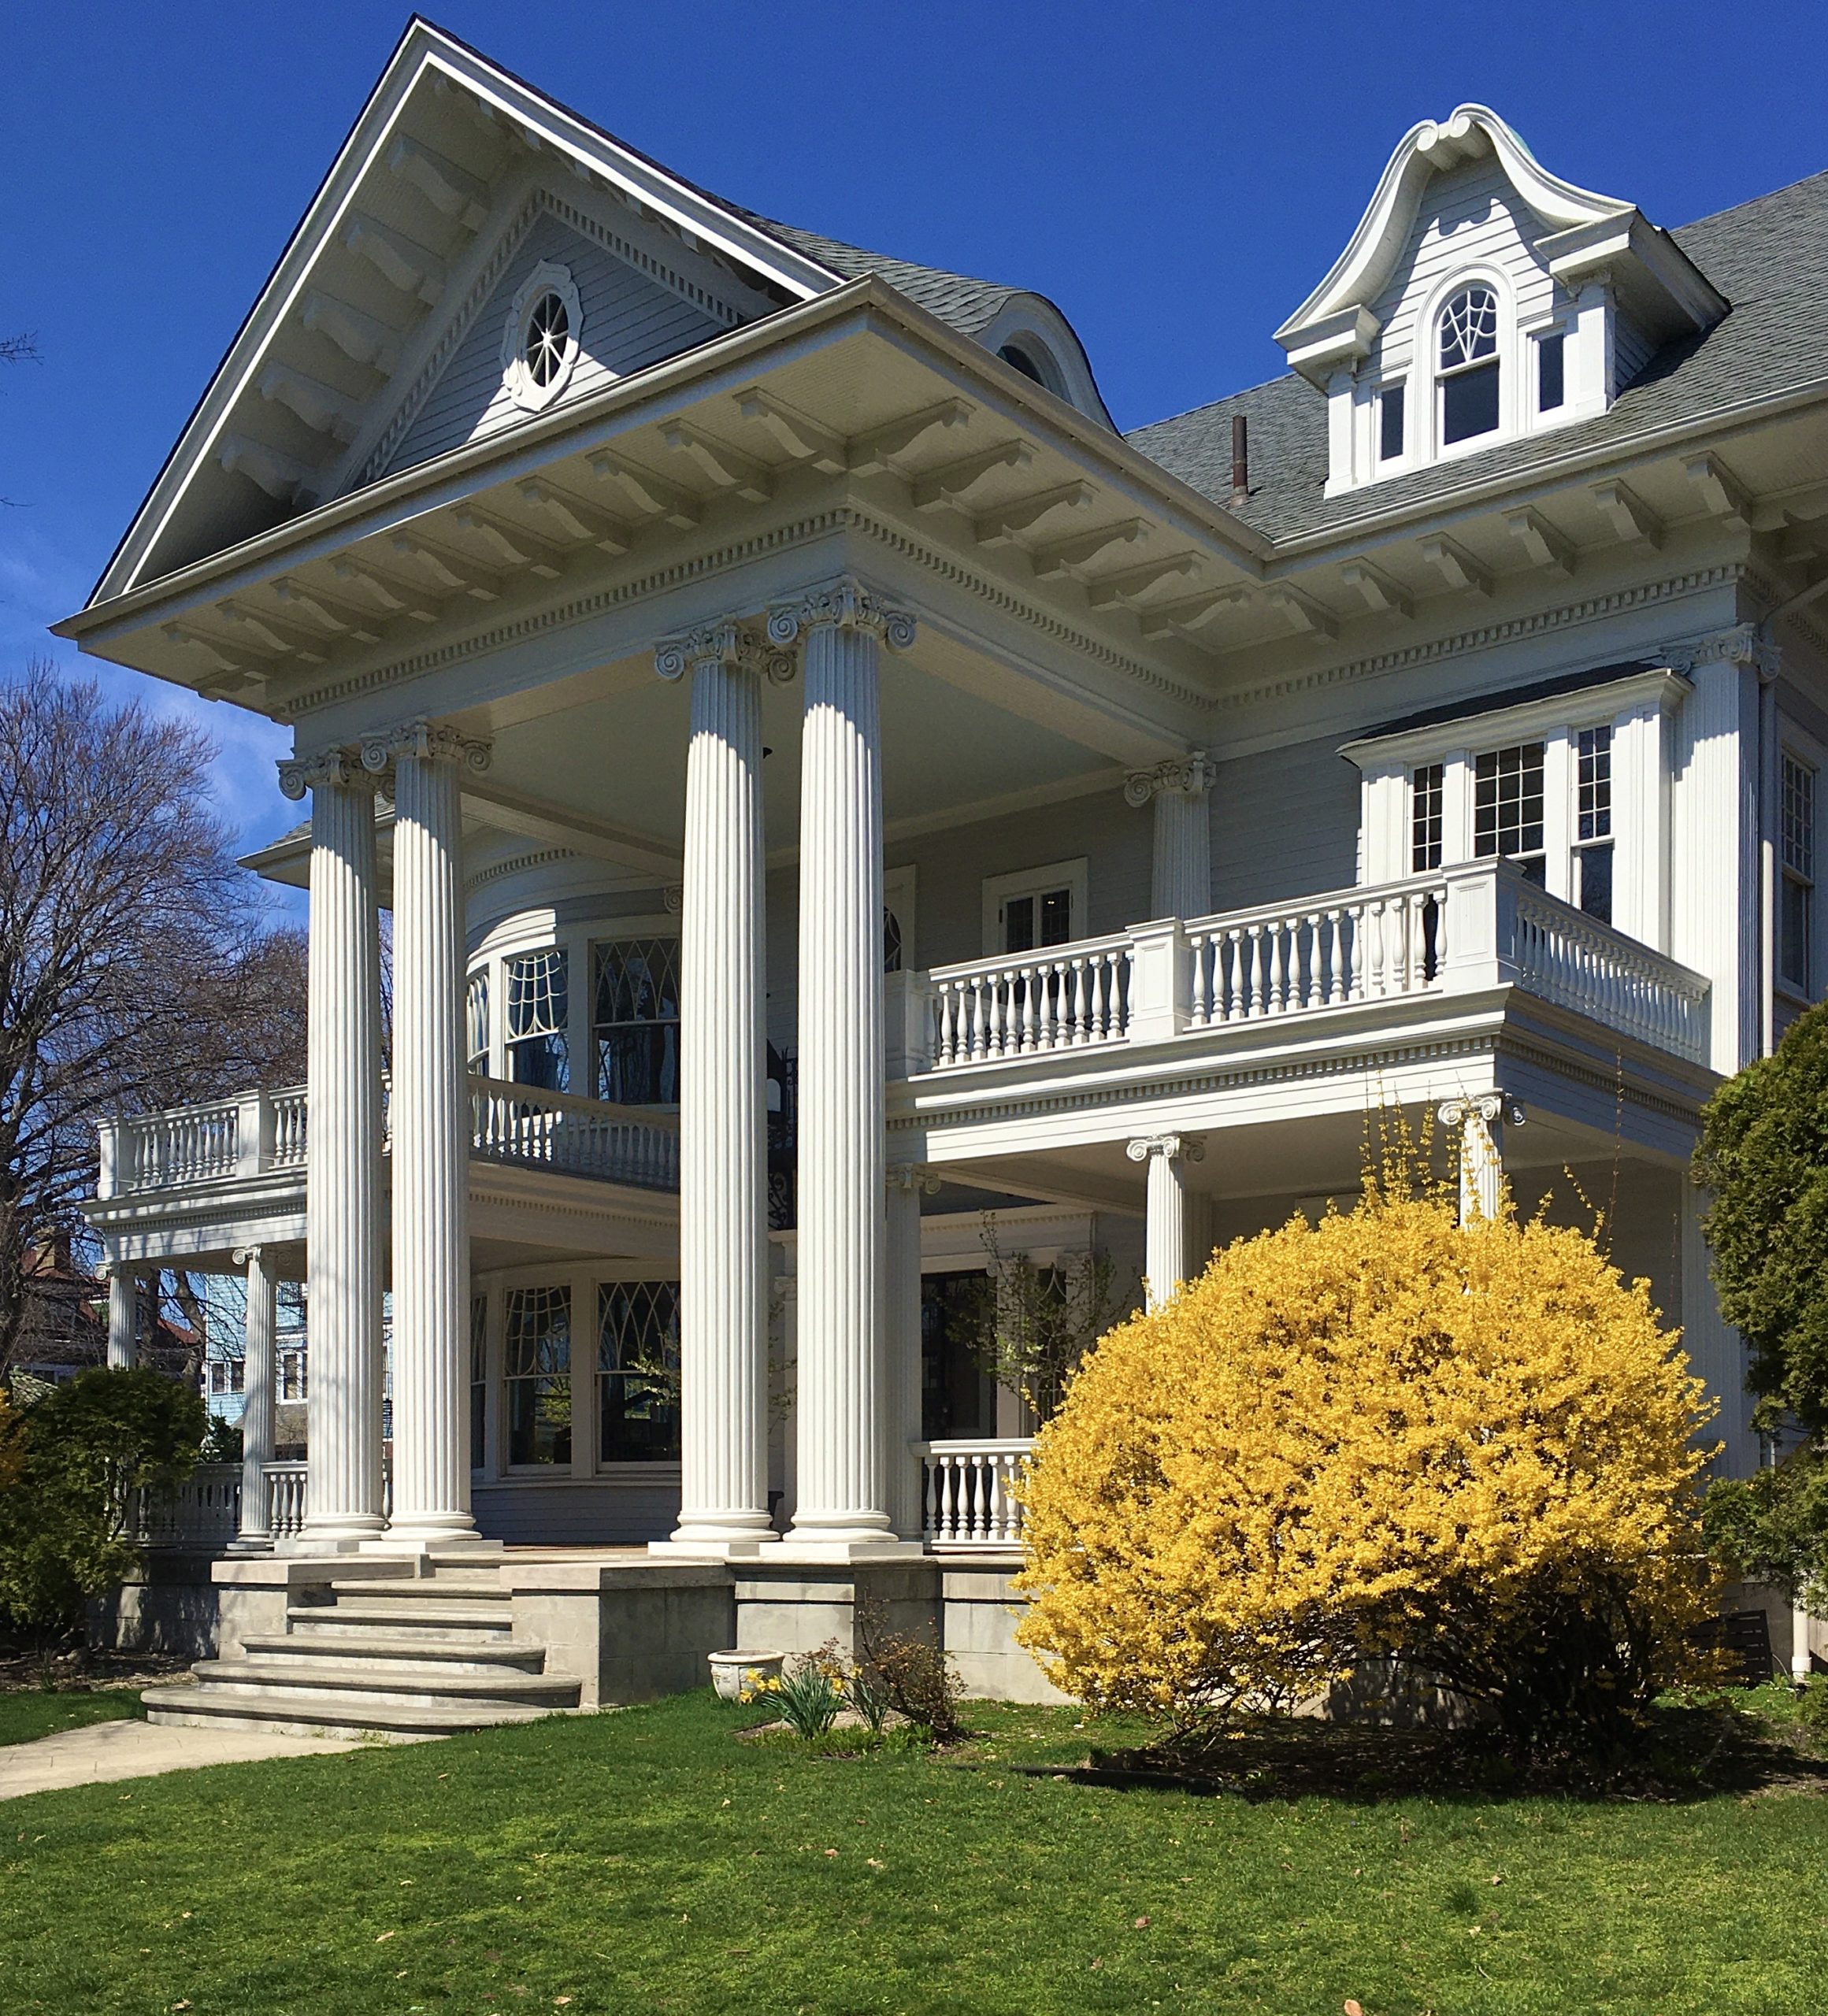 There’s so much architectural eye candy to see in Prospect Park South. Photo: Lore Croghan/Brooklyn Eagle